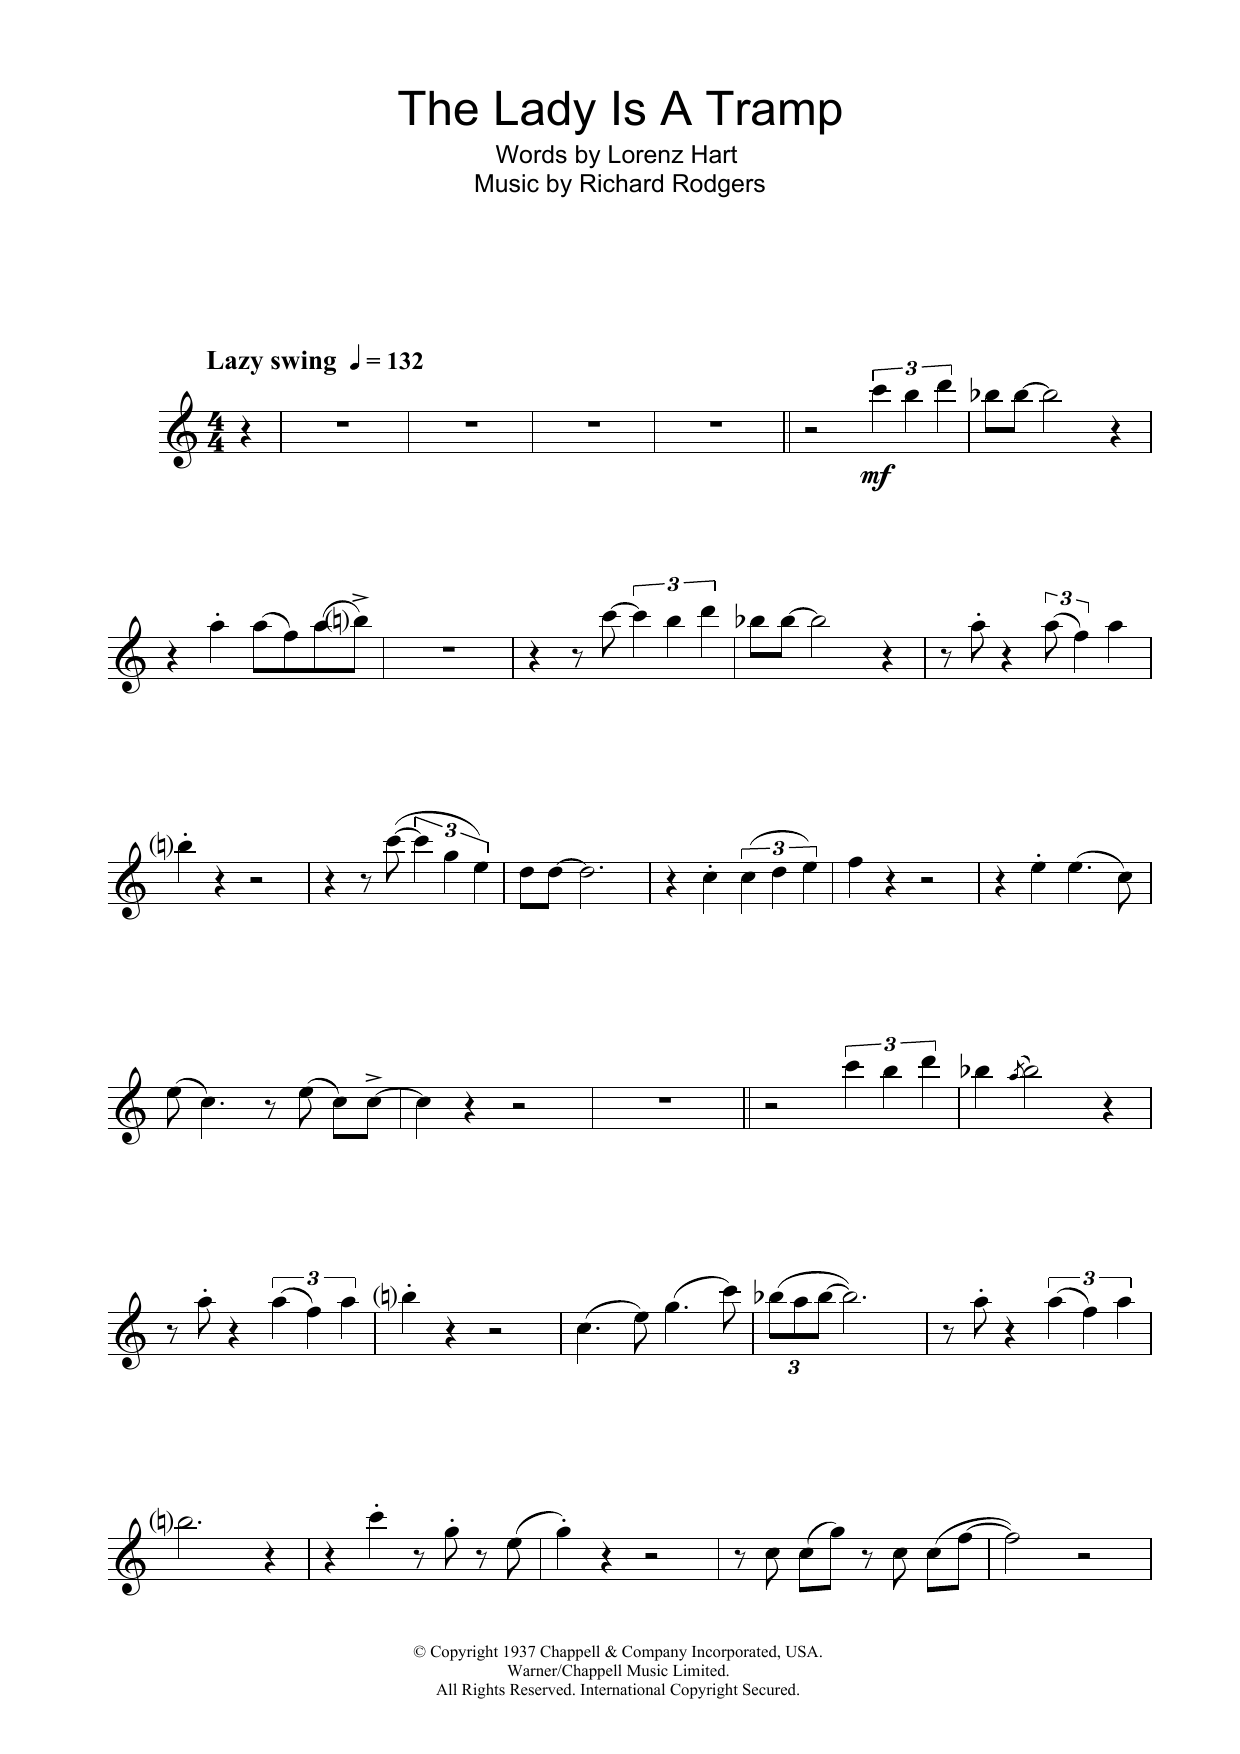 Download Frank Sinatra The Lady Is A Tramp Sheet Music